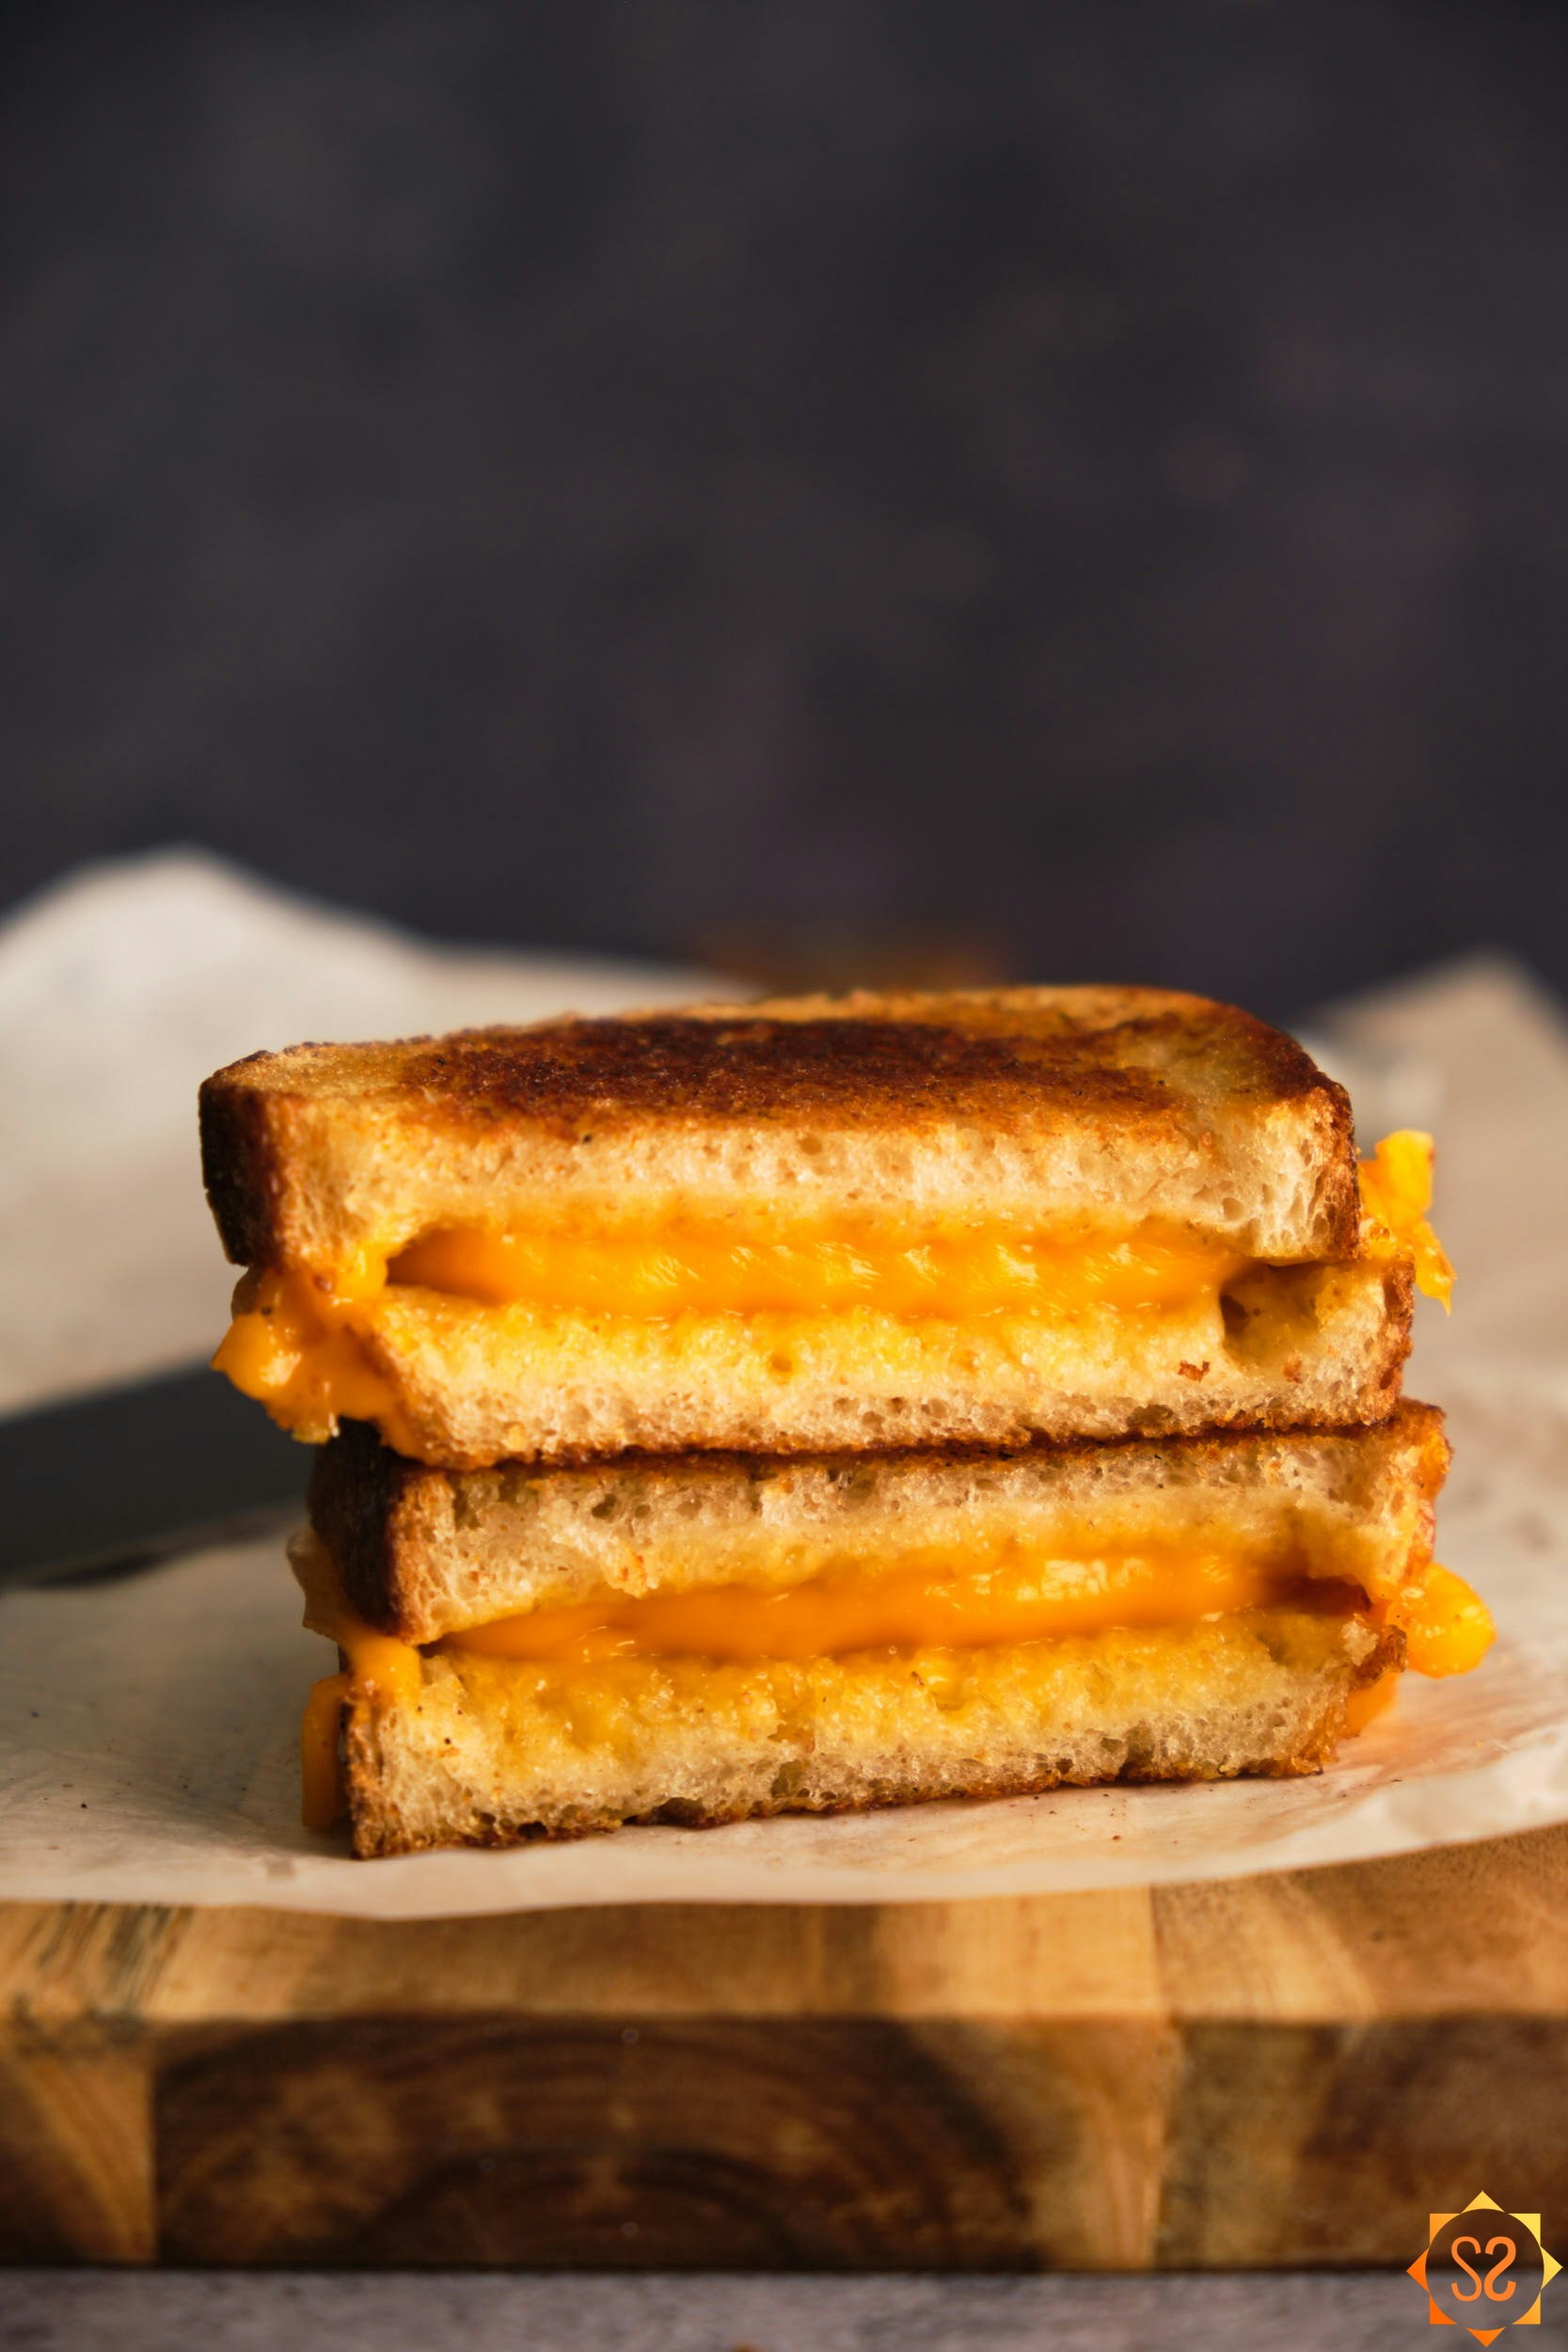 A side view of a grilled cheese sandwich made with Follow Your Heart American, stacked